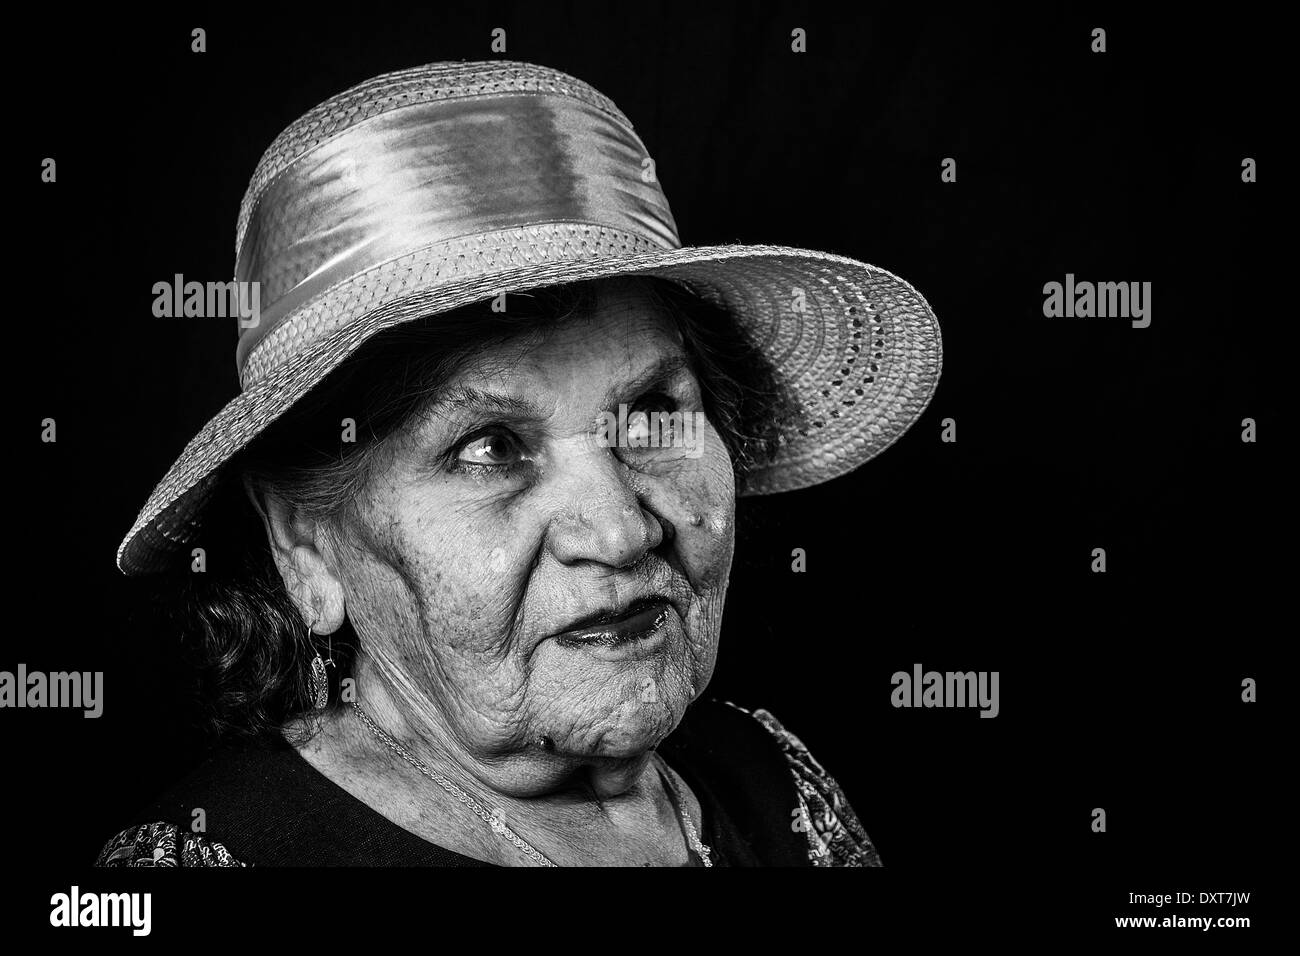 Portrait of the old woman in a hat on a black background Stock Photo